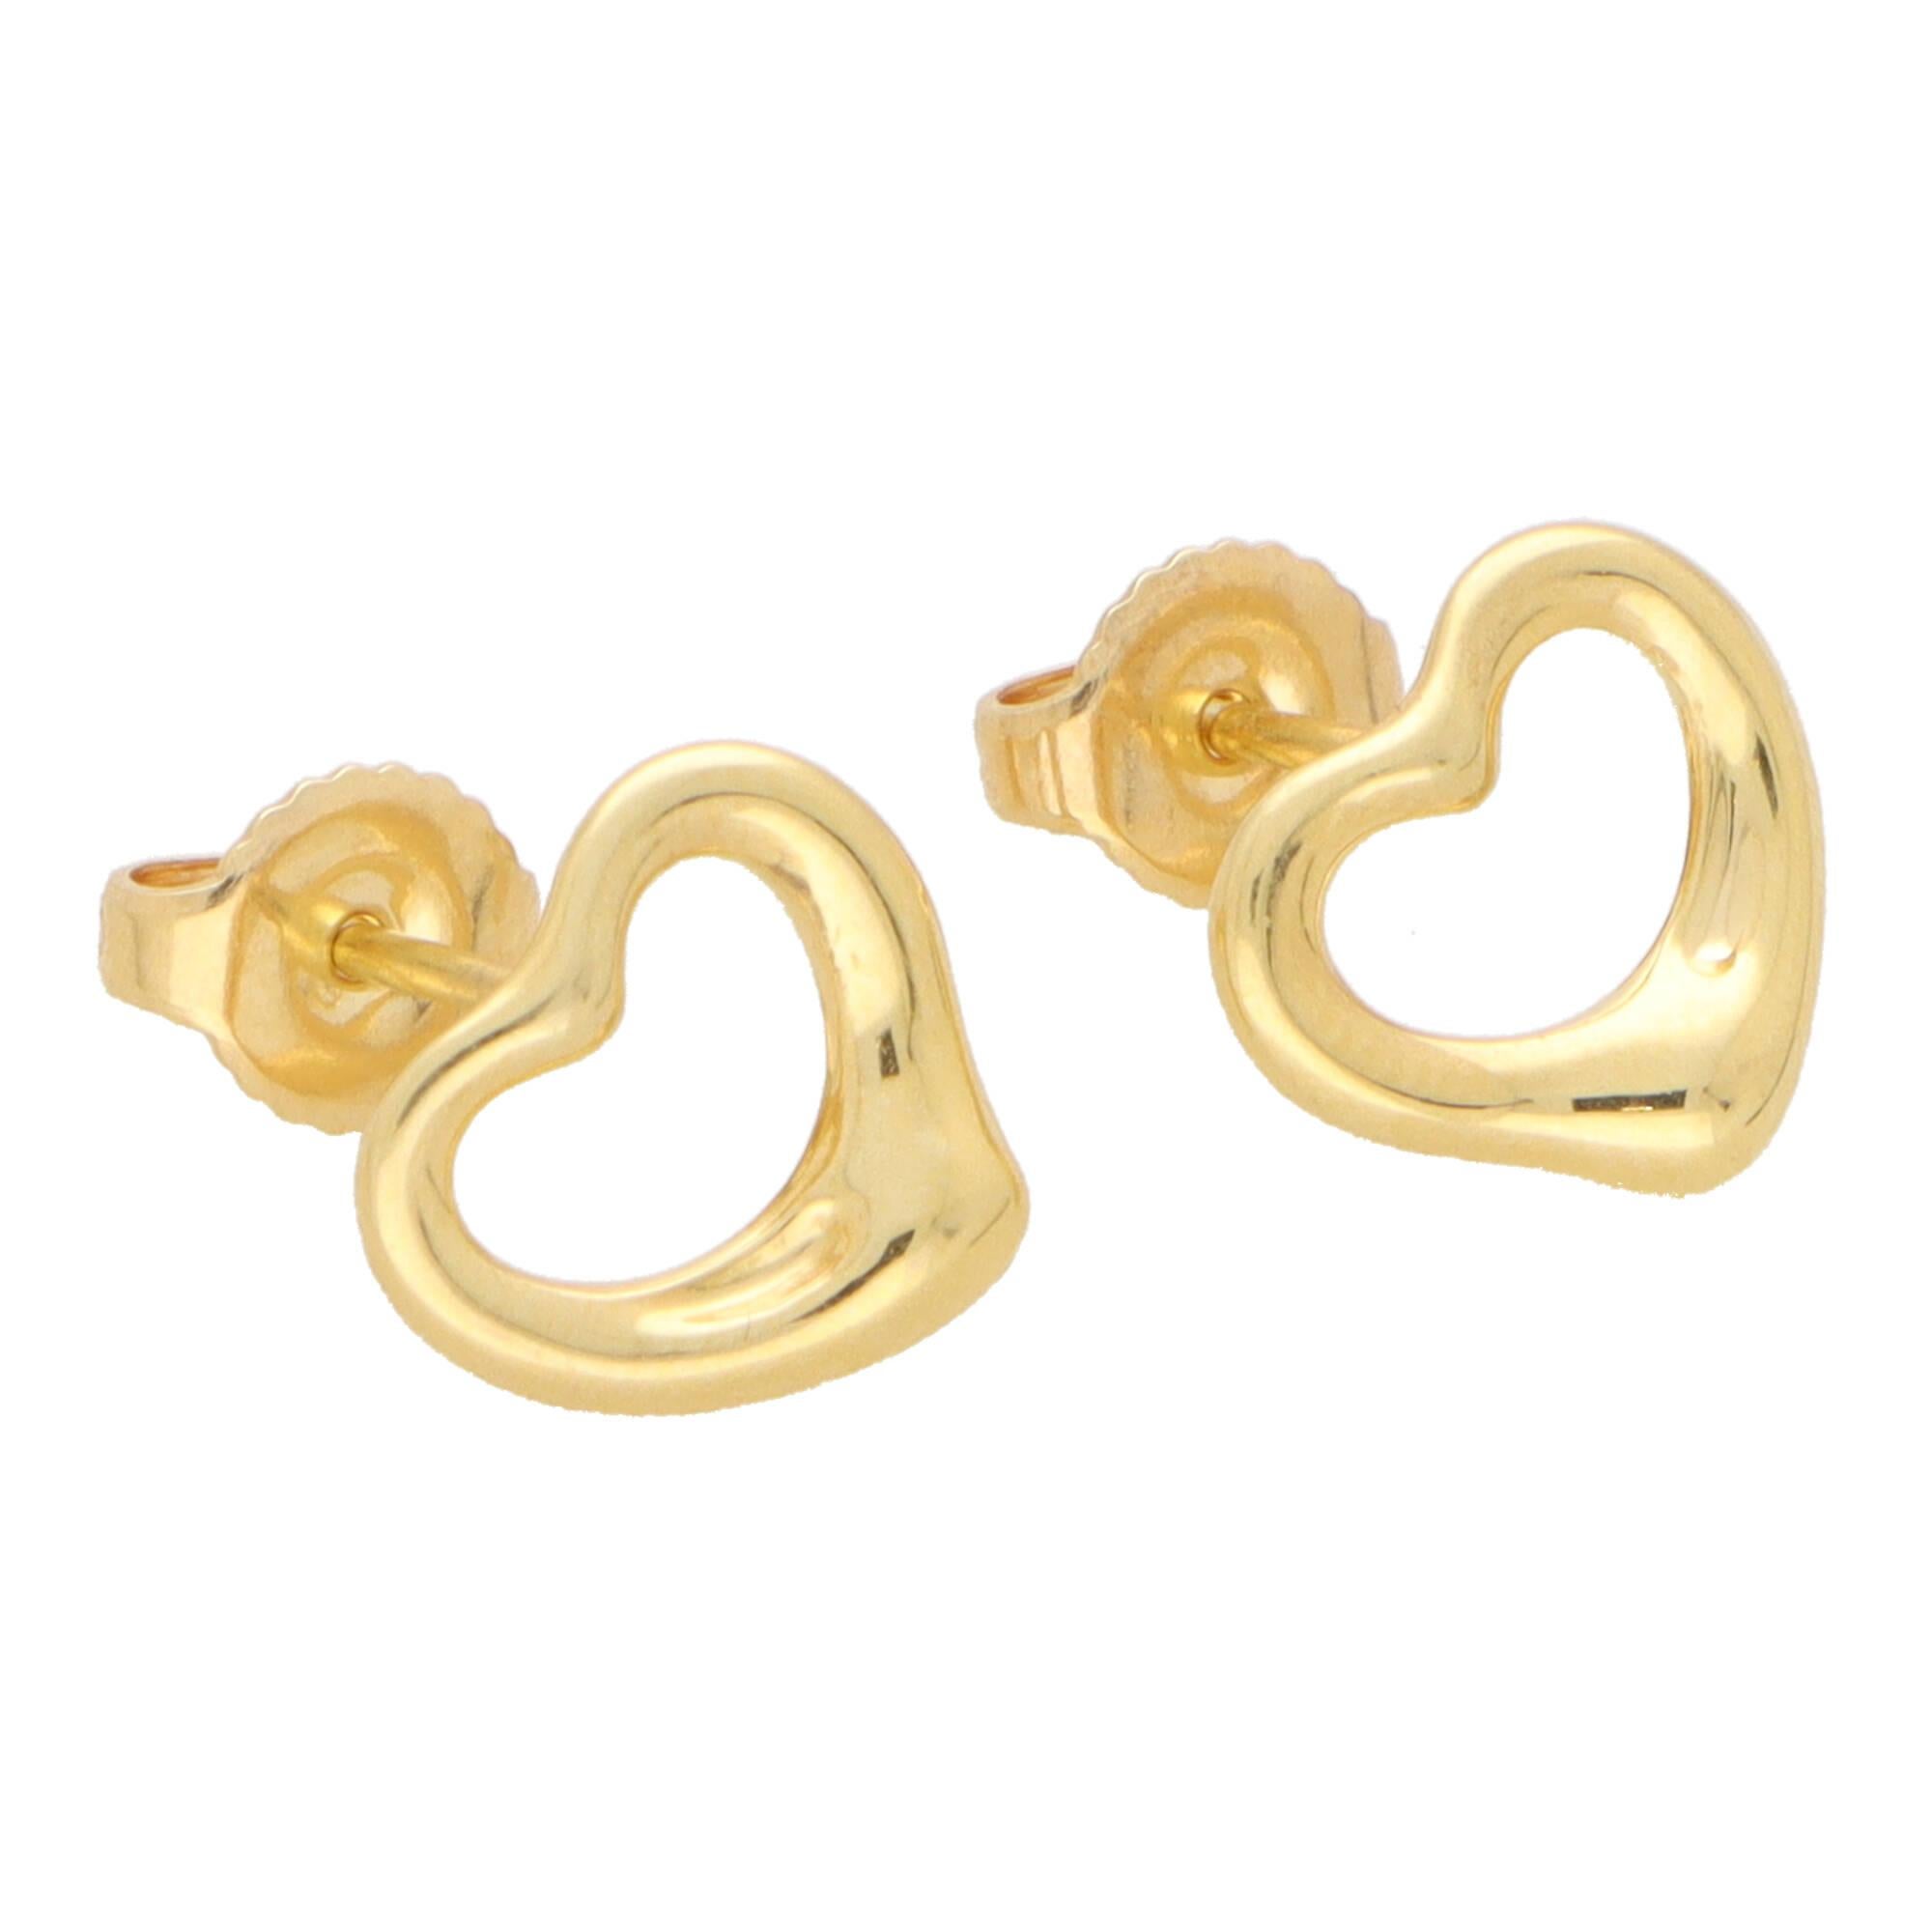 A lovely vintage pair of Elsa Peretti for Tiffany & Co. open heart stud earrings set in 18k yellow gold.

From the current Elsa Peretti collection; each earring is composed in the iconic open heart motif. The hearts are set in polished yellow gold